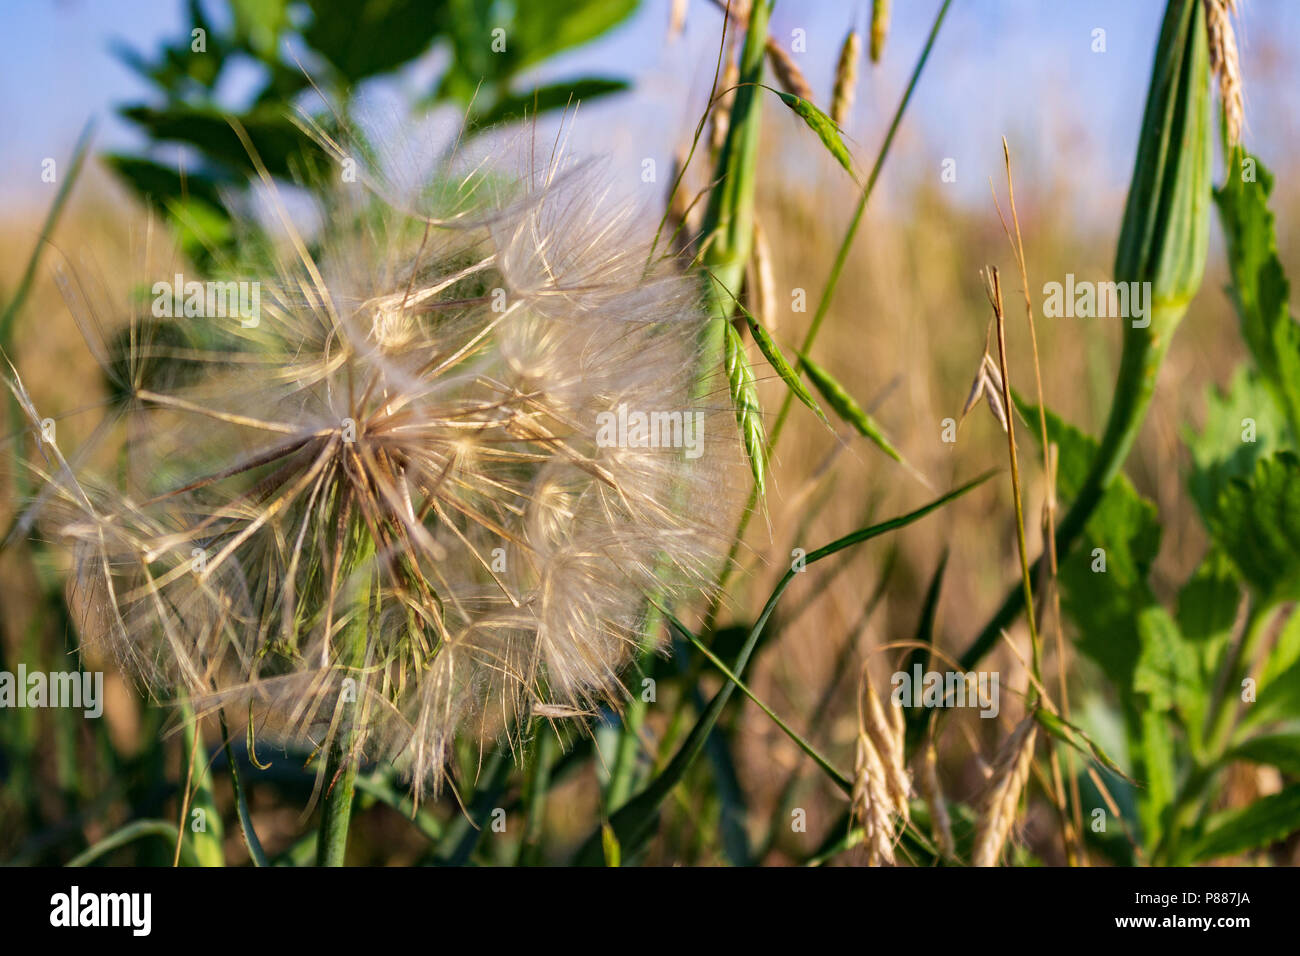 The seed head of the Western Salsify, looking very much like a giant dandelion, stands amid the prairie grasses of the Nebraska Sandhills. Stock Photo